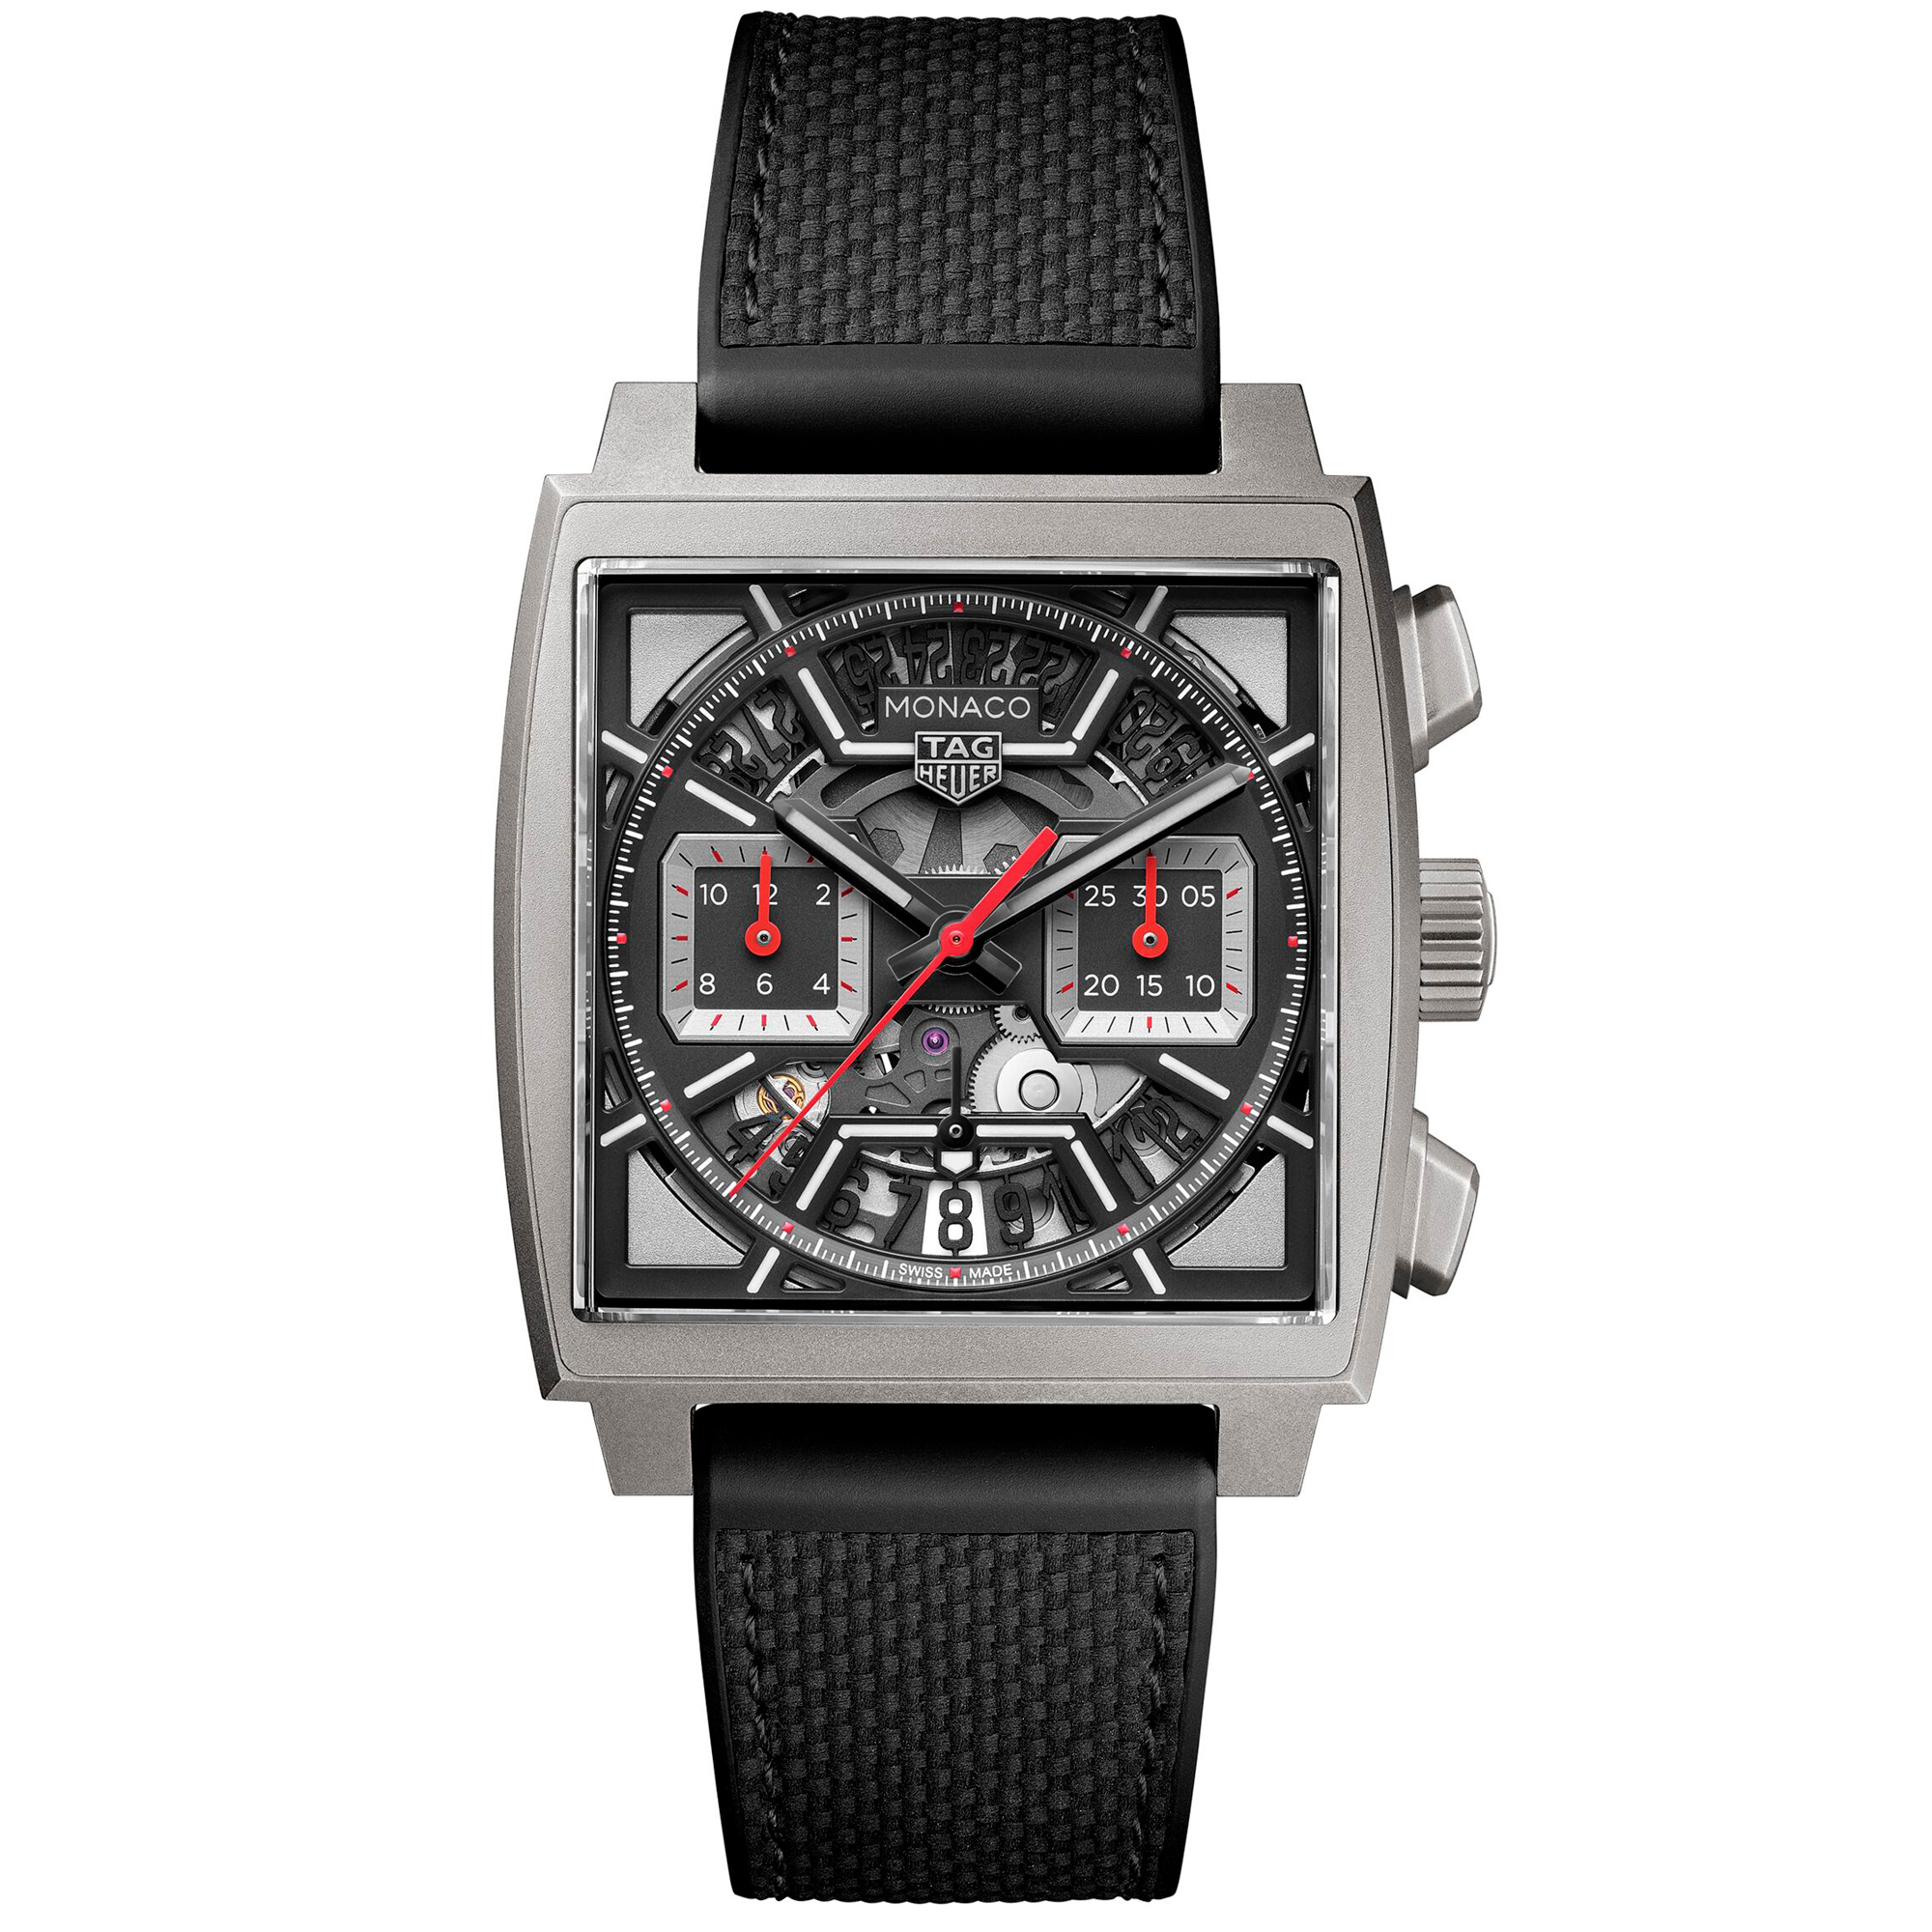 MONACO Calibre HEUER 02 Automatic Chronograph Limited Edition Watch 39mm - TAG Heuer CBL2183.FT6236